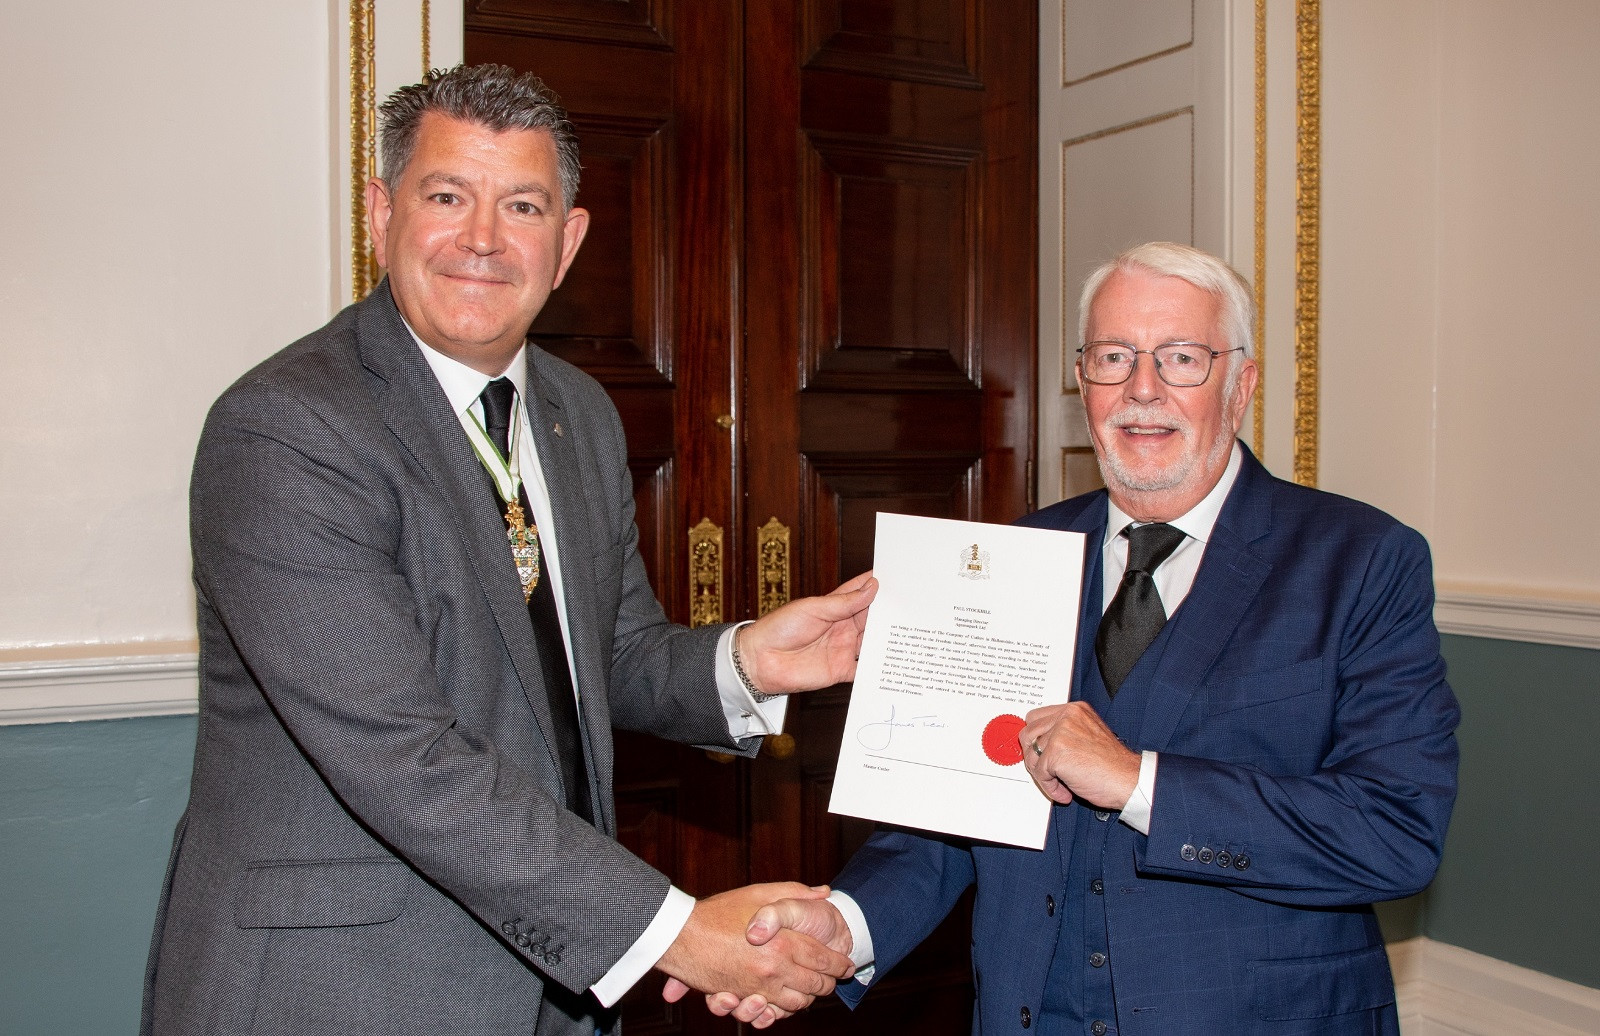 Doncaster Engineering boss becomes Freeman of the Company of Cutlers